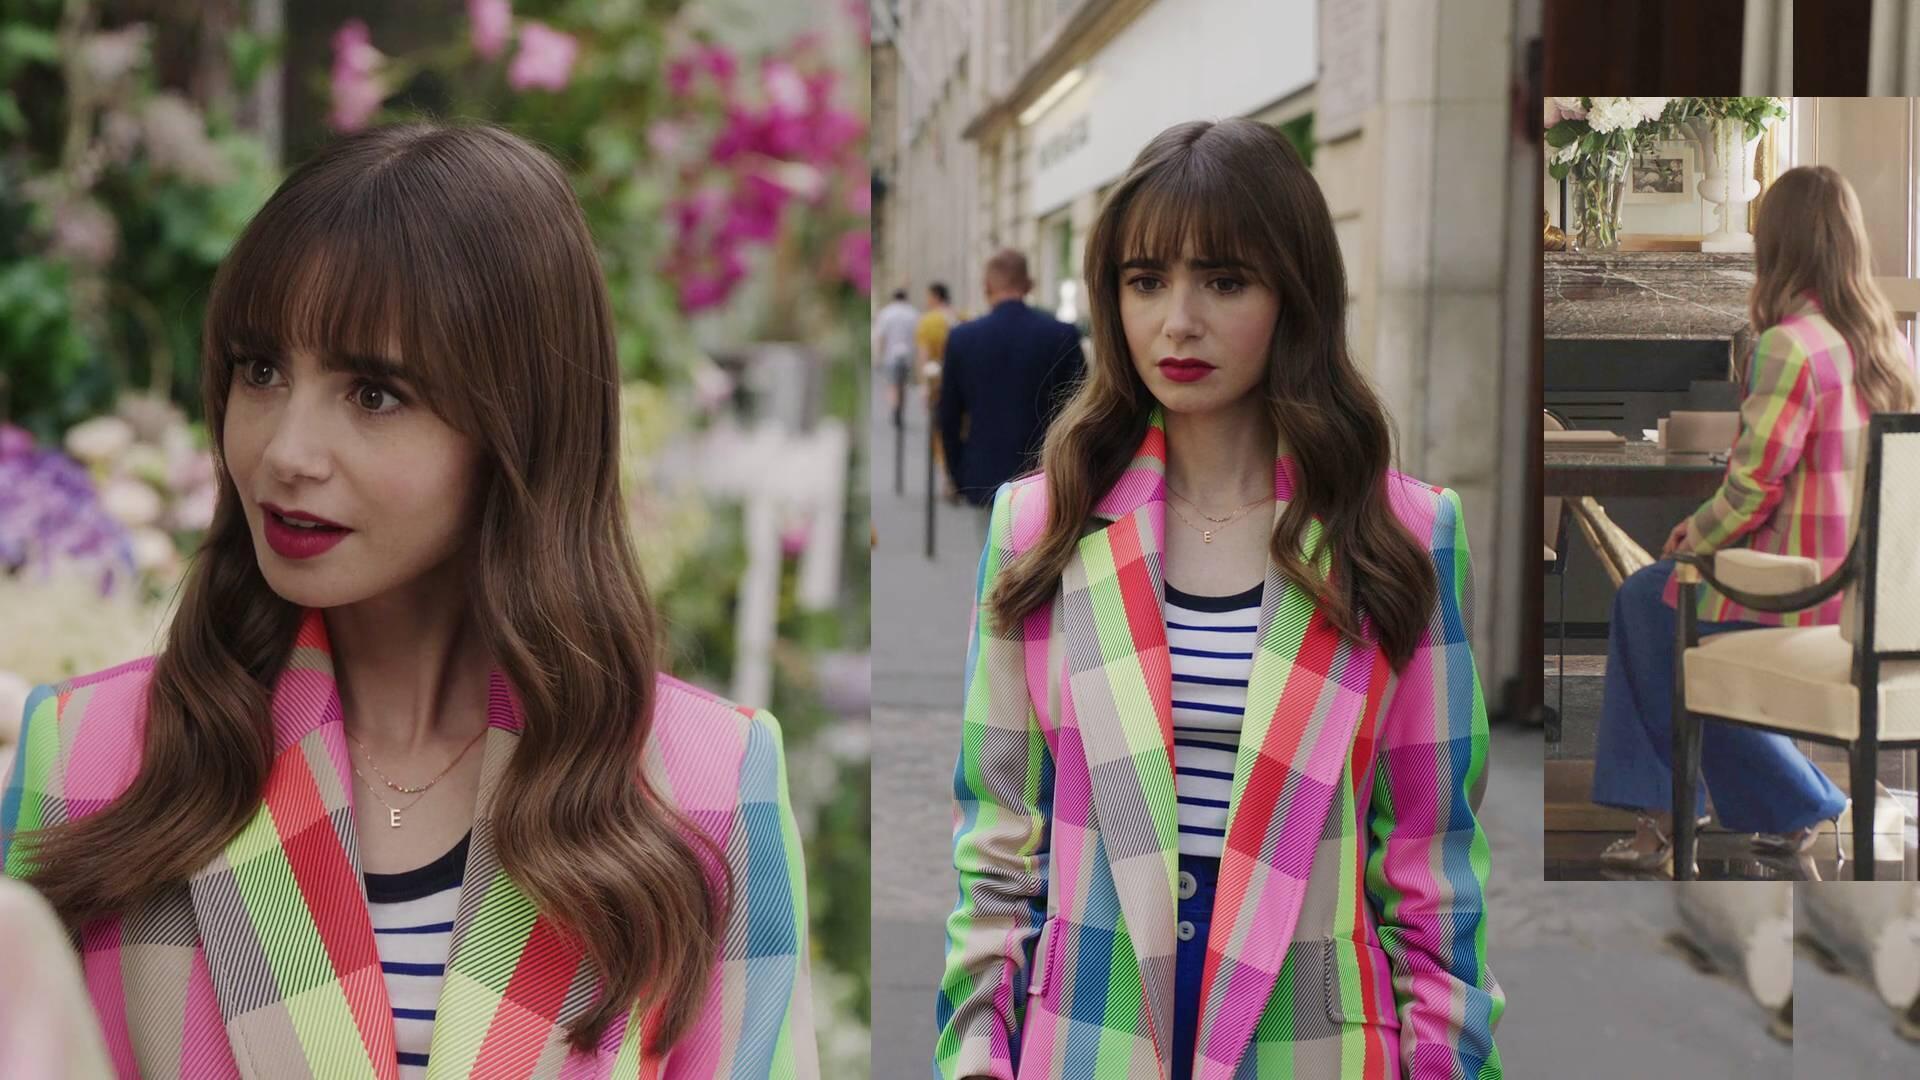 Lily Collins - Emily in Paris | Season 3 Episode 2 | Lily Collins style